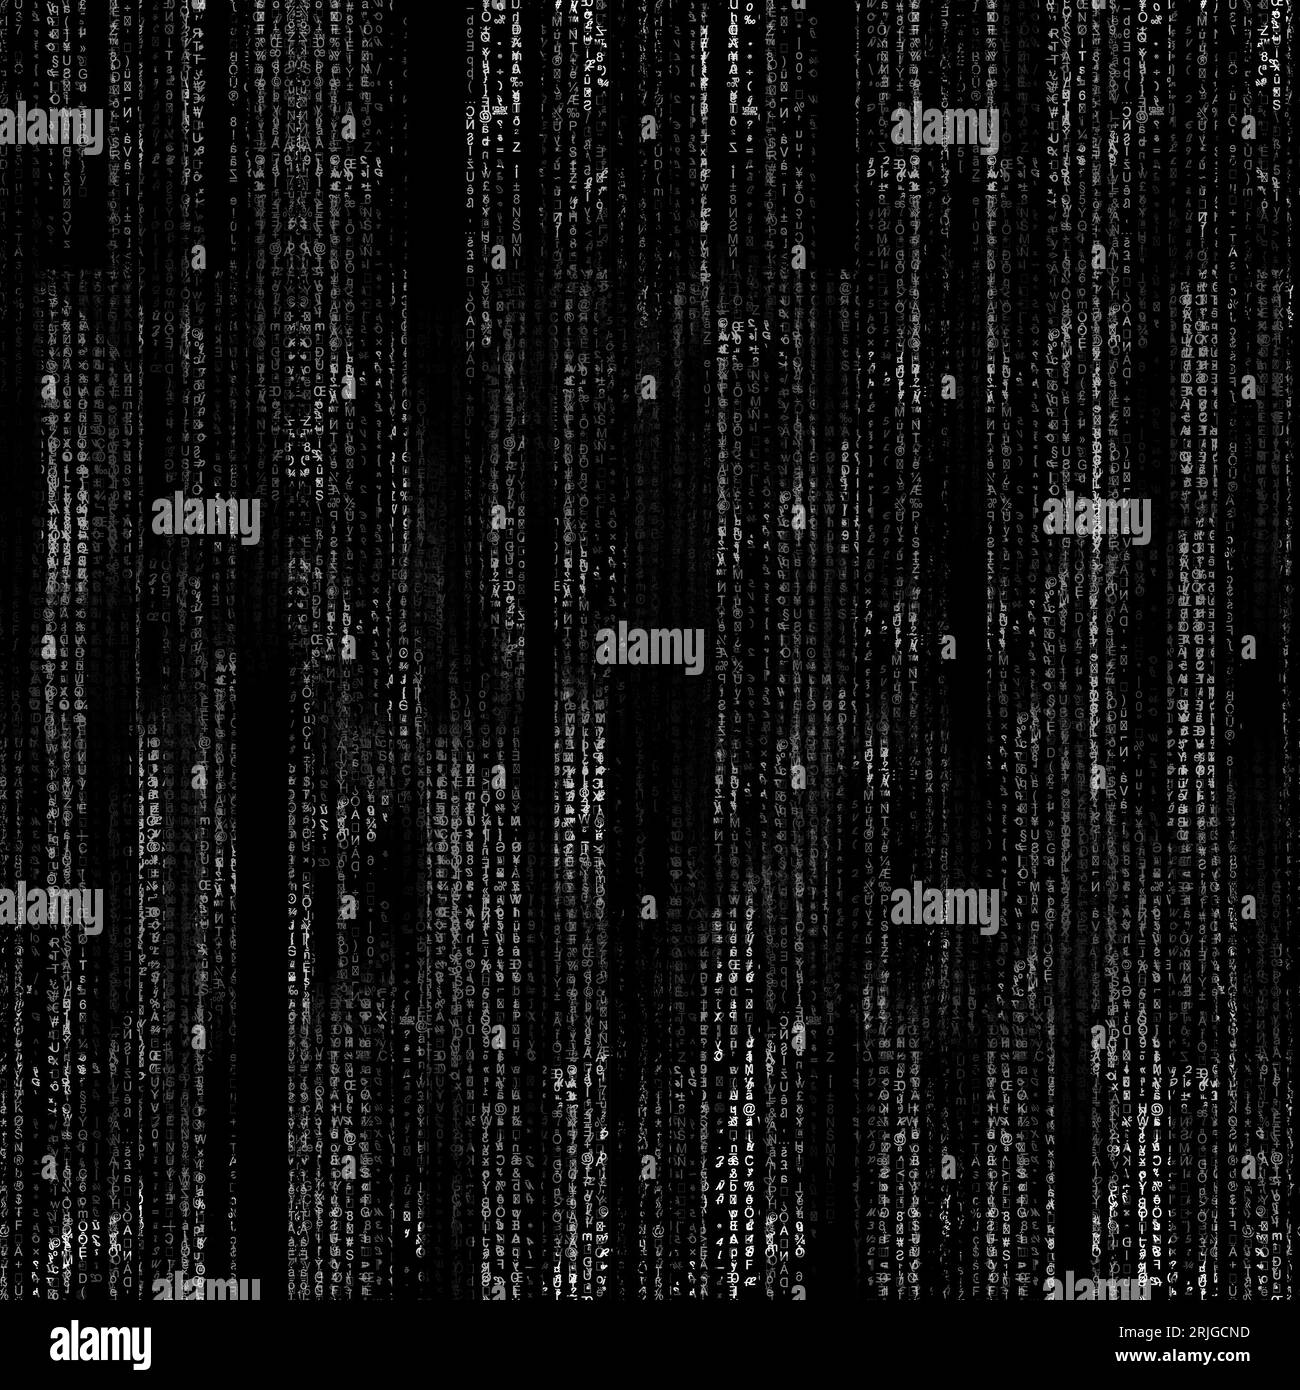 Abstract black and white computer code background pattern. Stock Photo